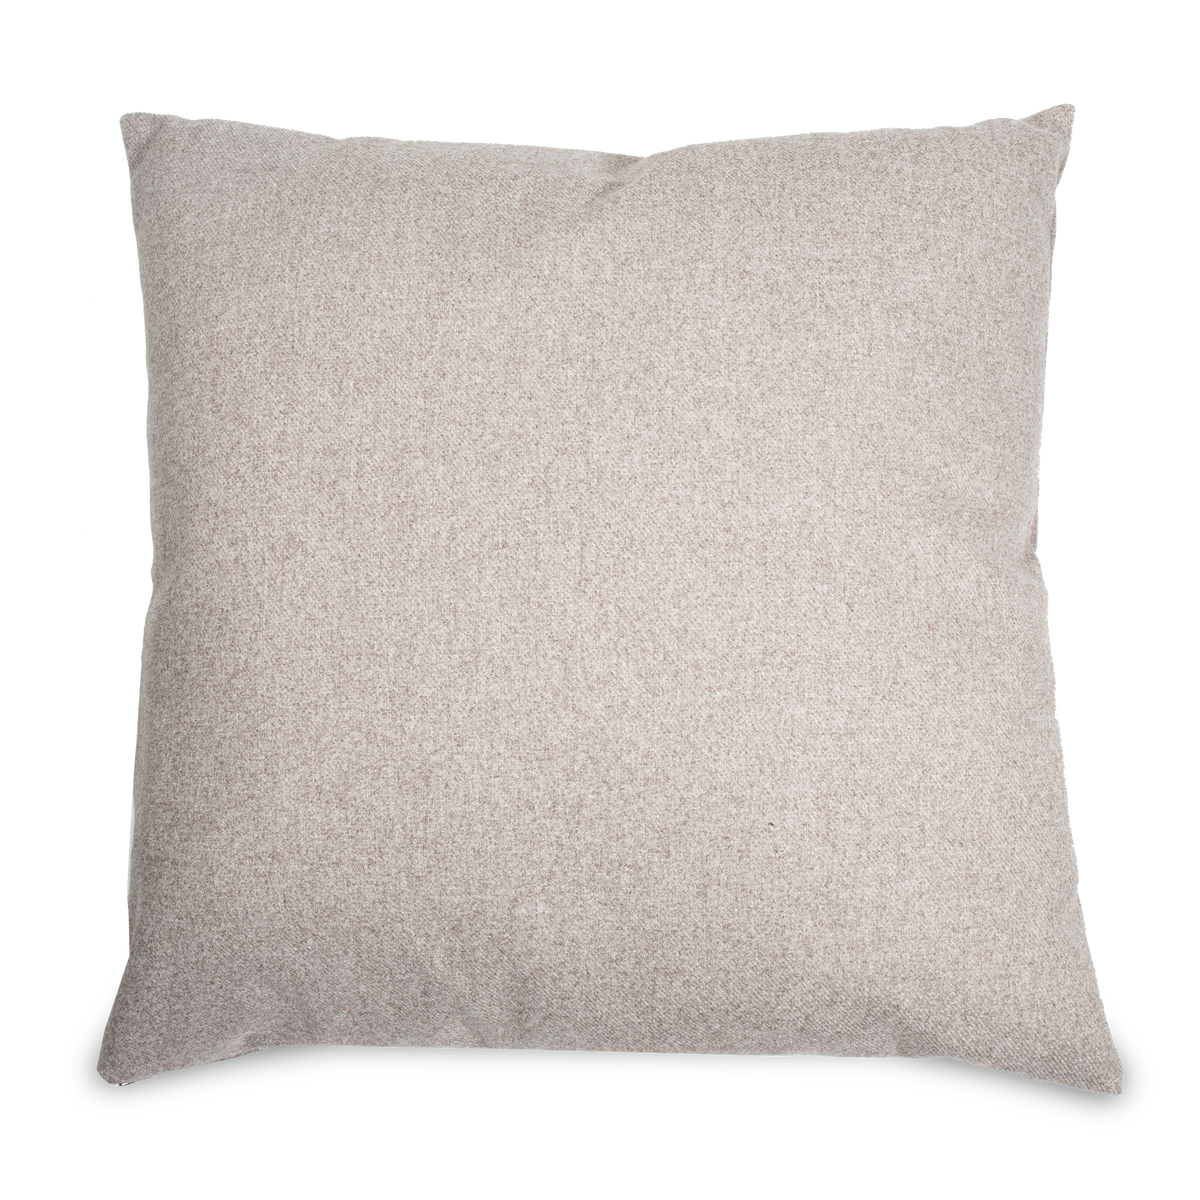 The Barrett Pillow in walnut is simple in design but rich in colour featuring a clean knife edge finish.